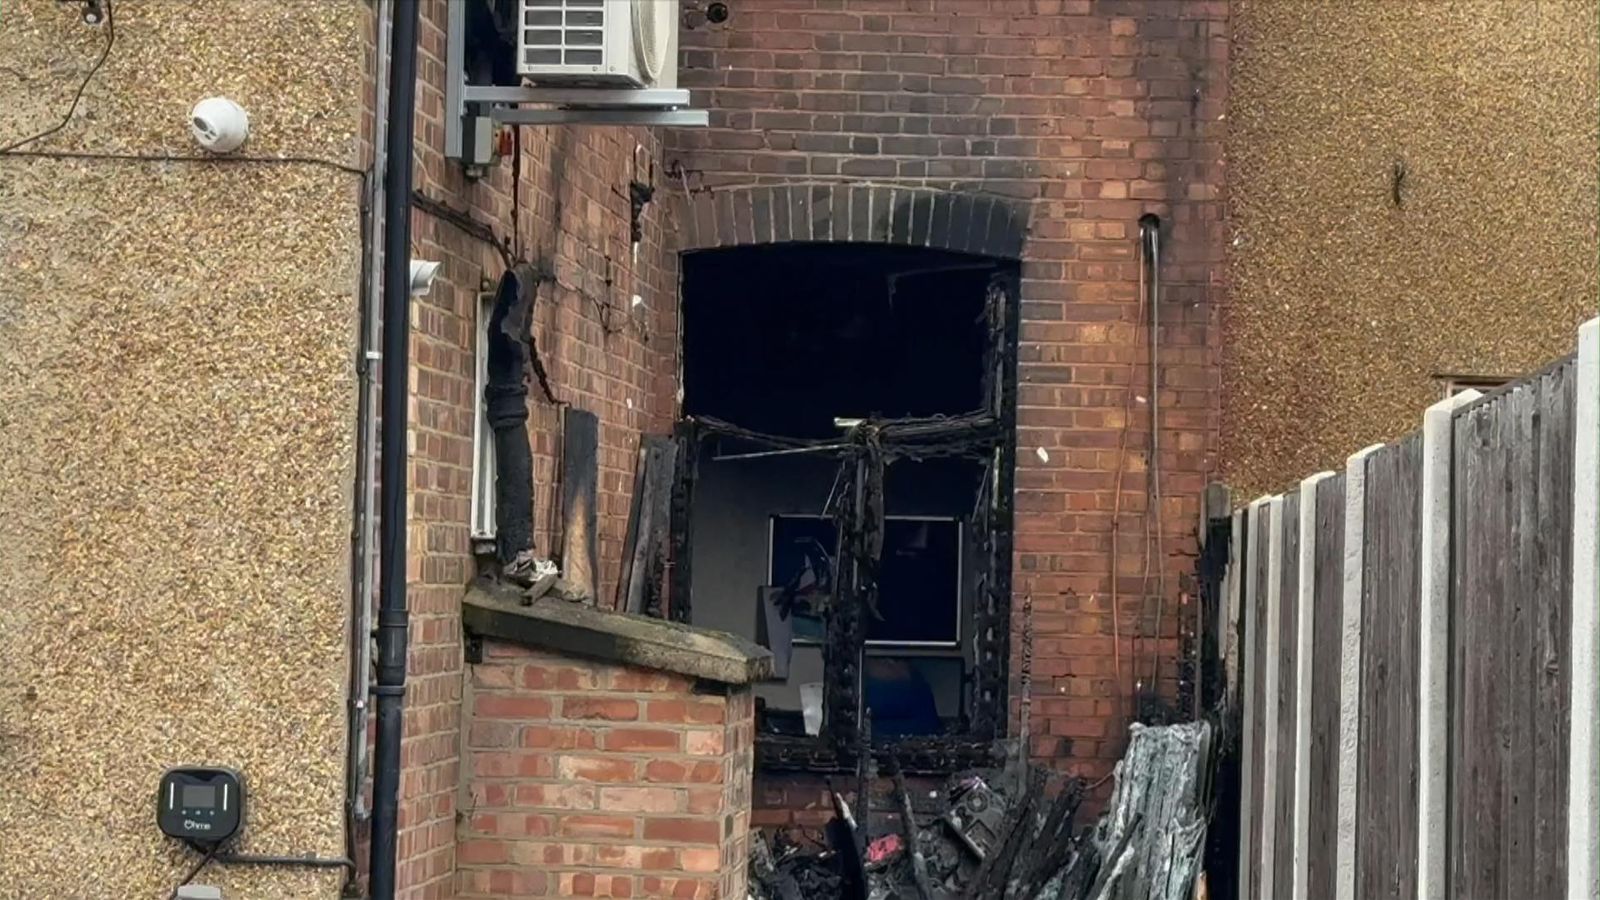 Mike Freer: Two people charged with arson after fire at Tory MP's office over Christmas